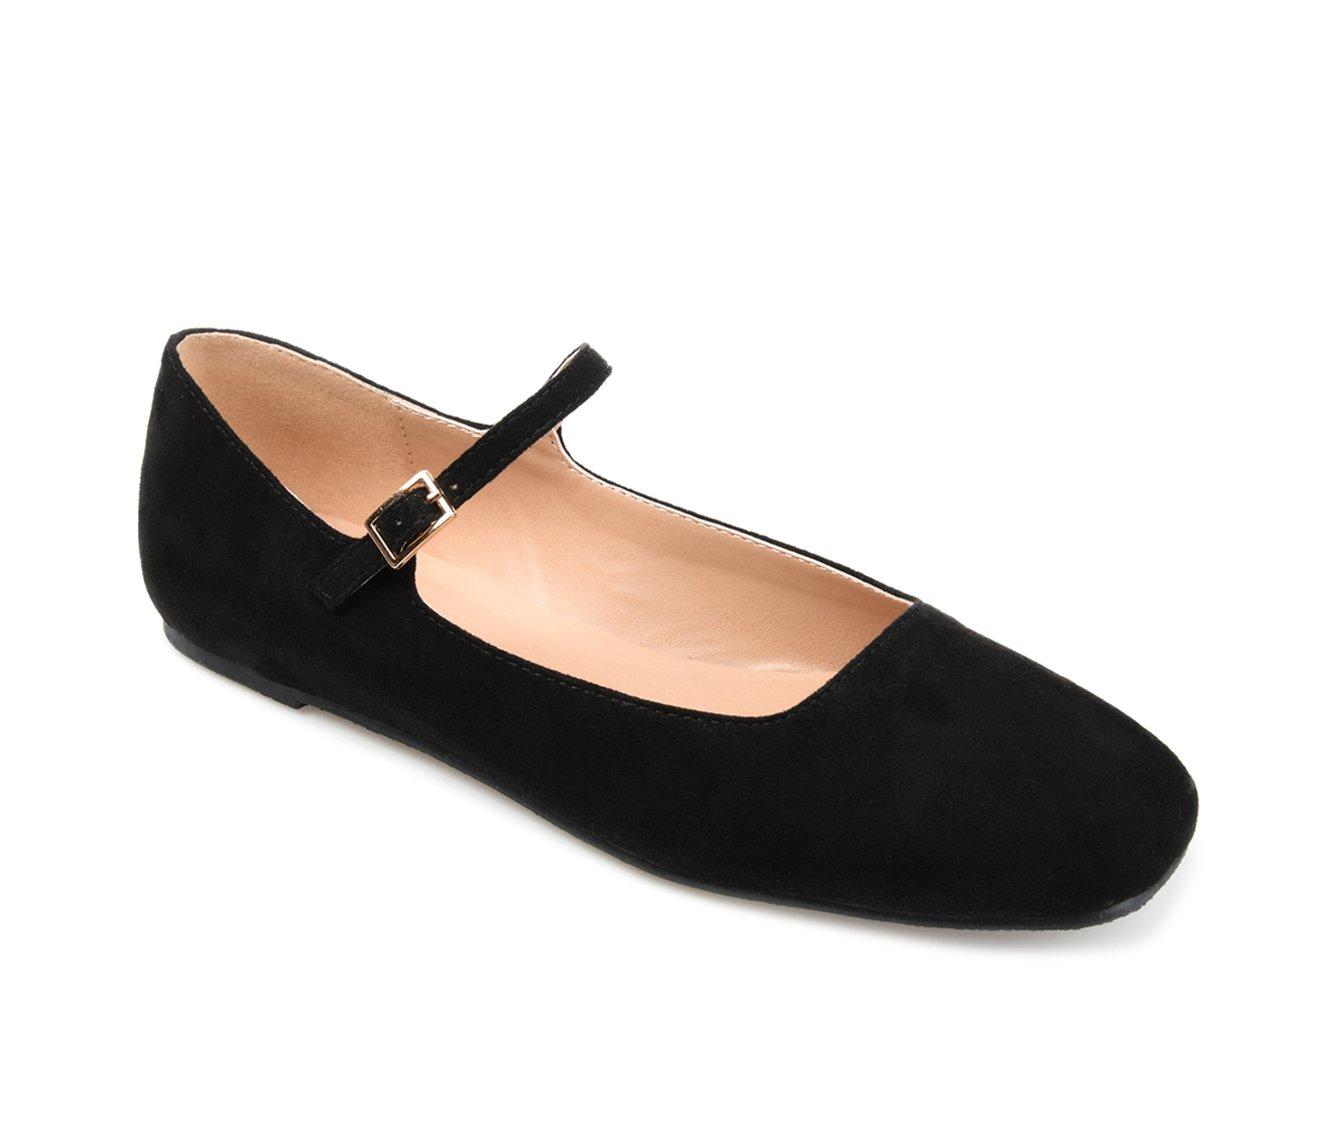 Women's Journee Collection Carrie Flats